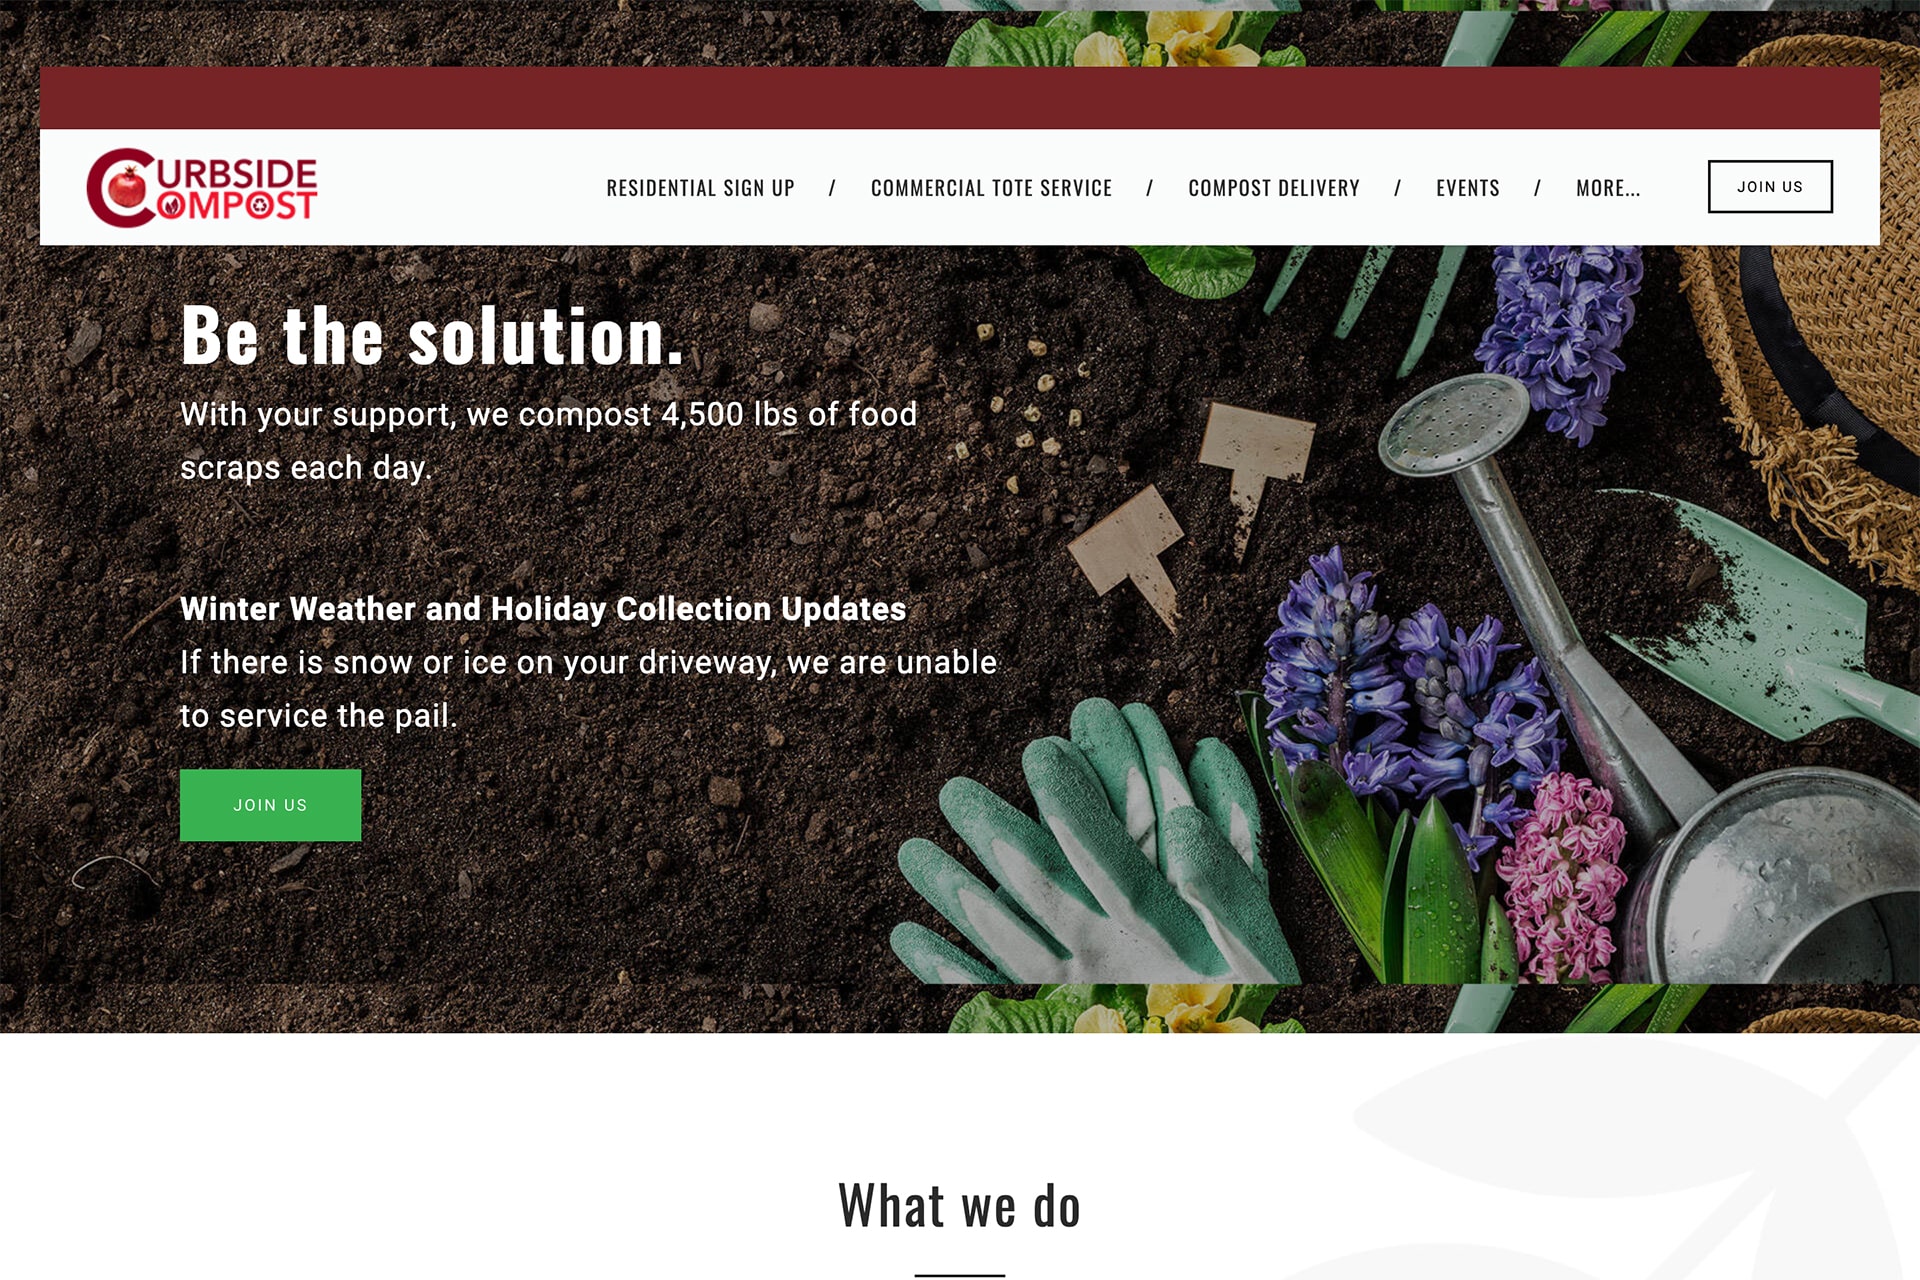 Weebly website example 17 - Curbside Compost